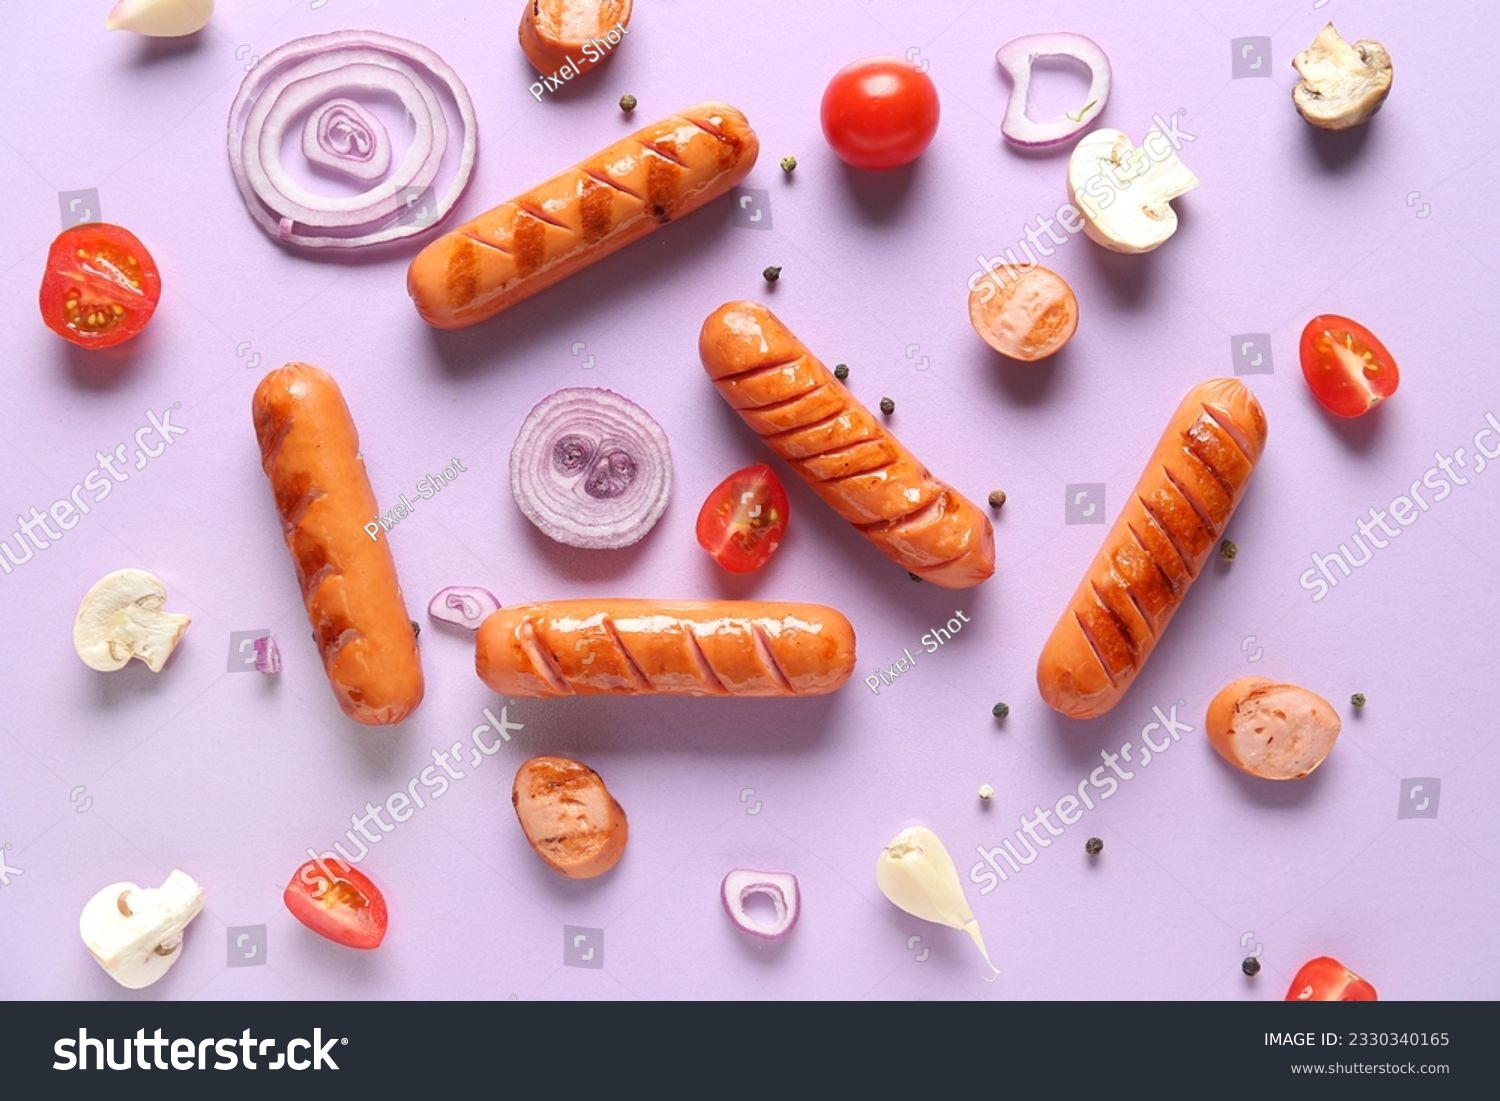 Tasty grilled sausages and vegetables on lilac background #2330340165